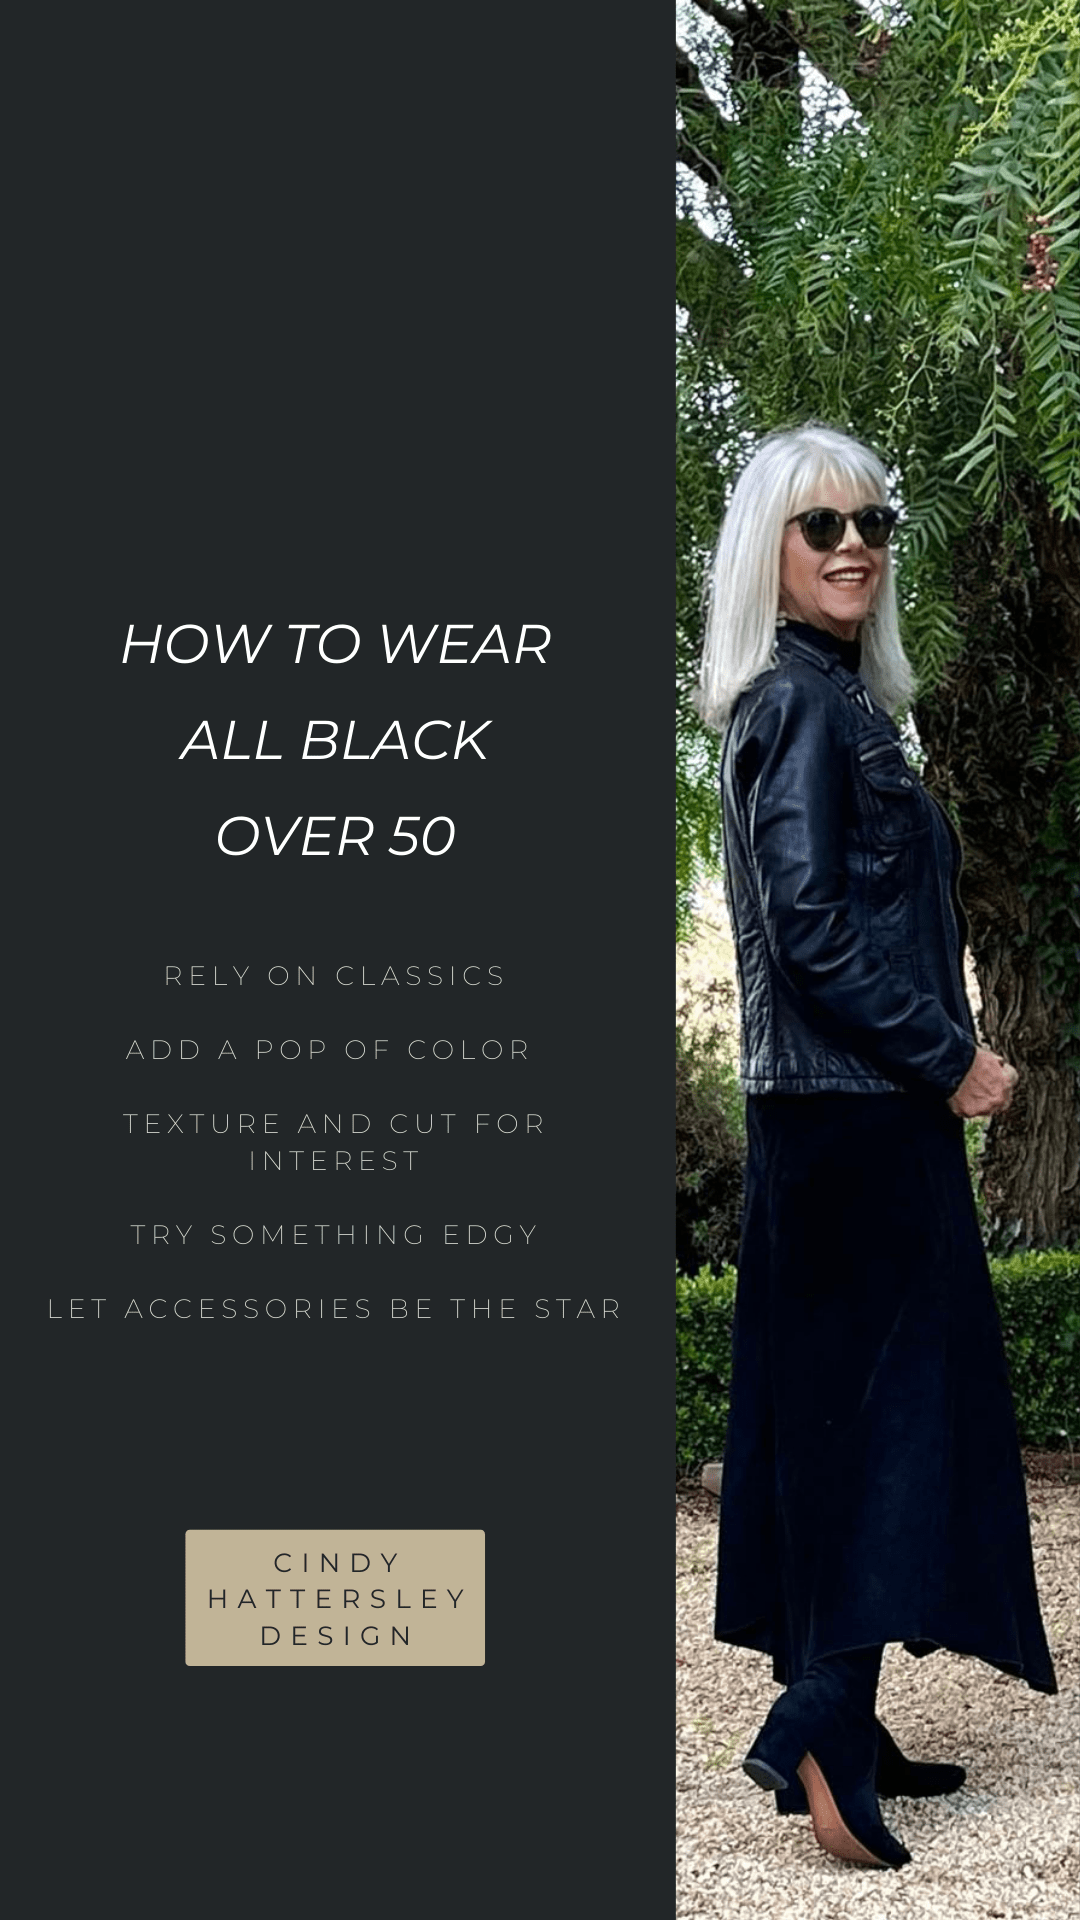 HOW TO WEAR ALL BLACK OVER 50 CINDY HATTERSLEY